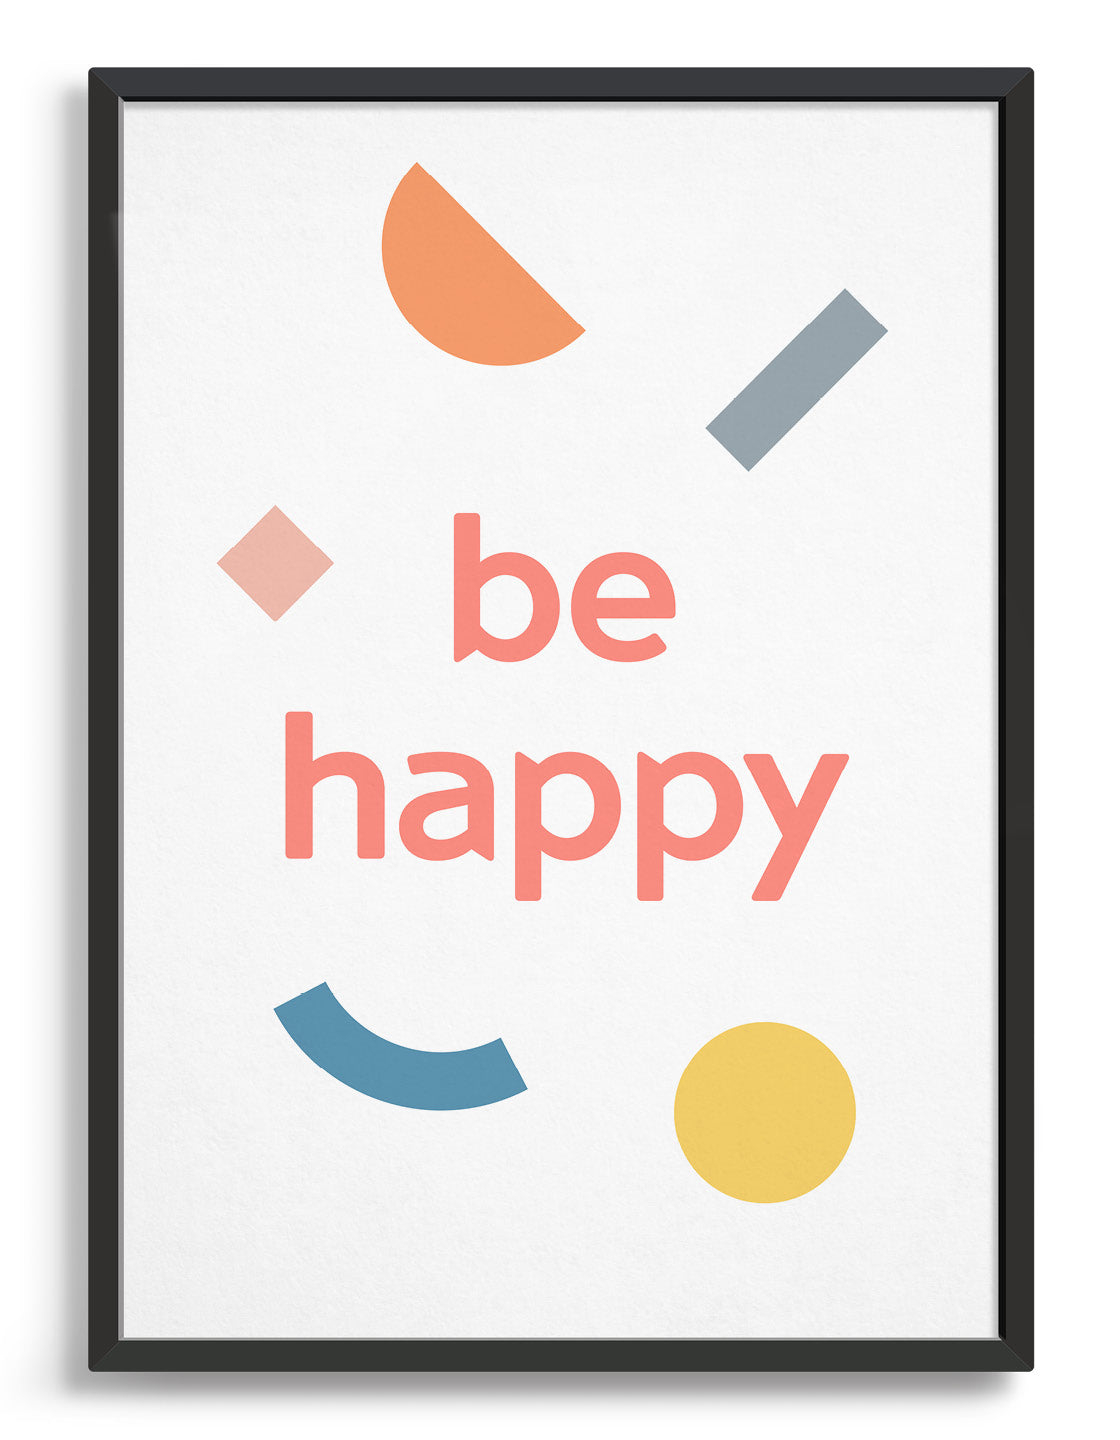 be happy motivational typography print in pink lettering against a white background with multi coloured pastel shapes